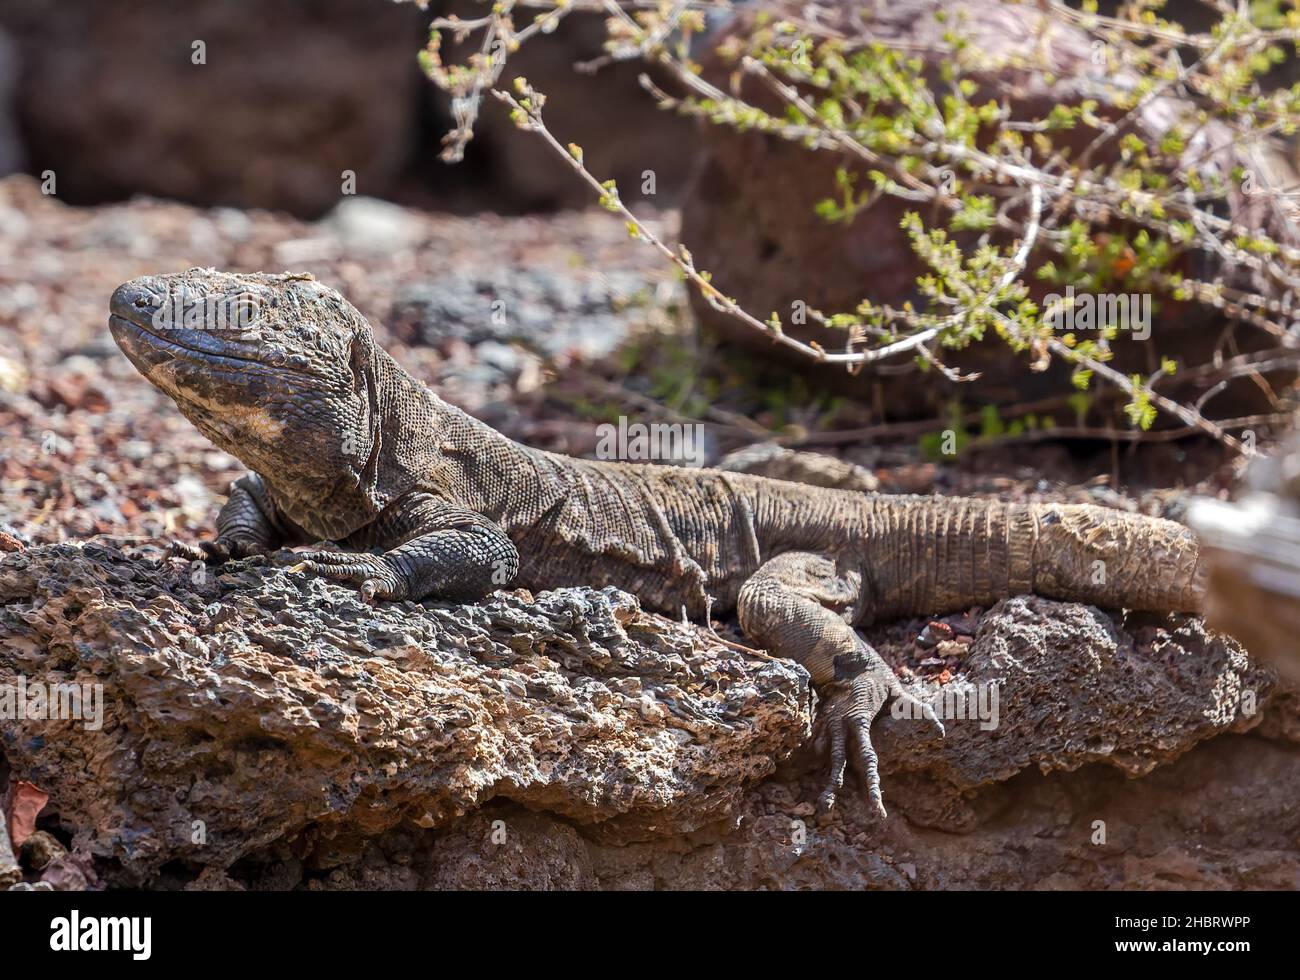 El Gigante High Resolution Stock Photography and Images - Alamy